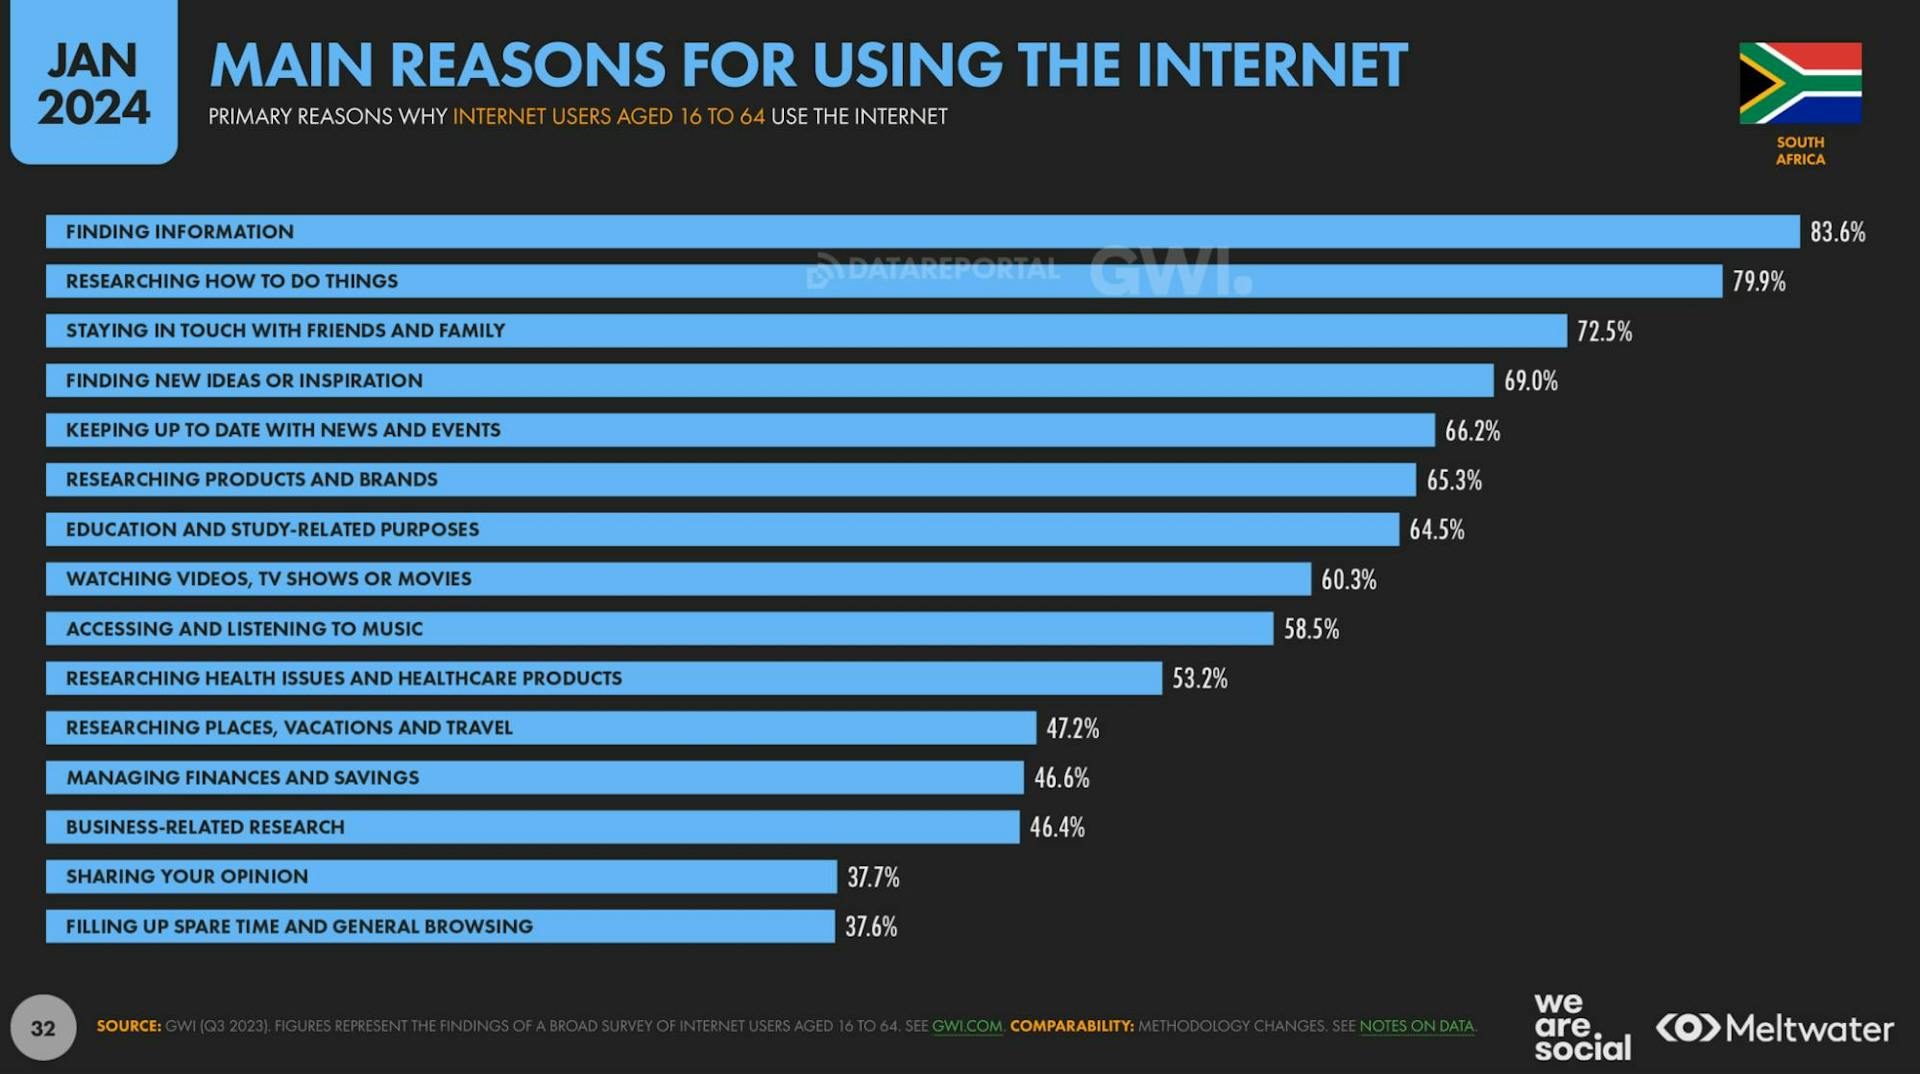 2024 Social Media Statistics South Africa: Main reasons for using the internet